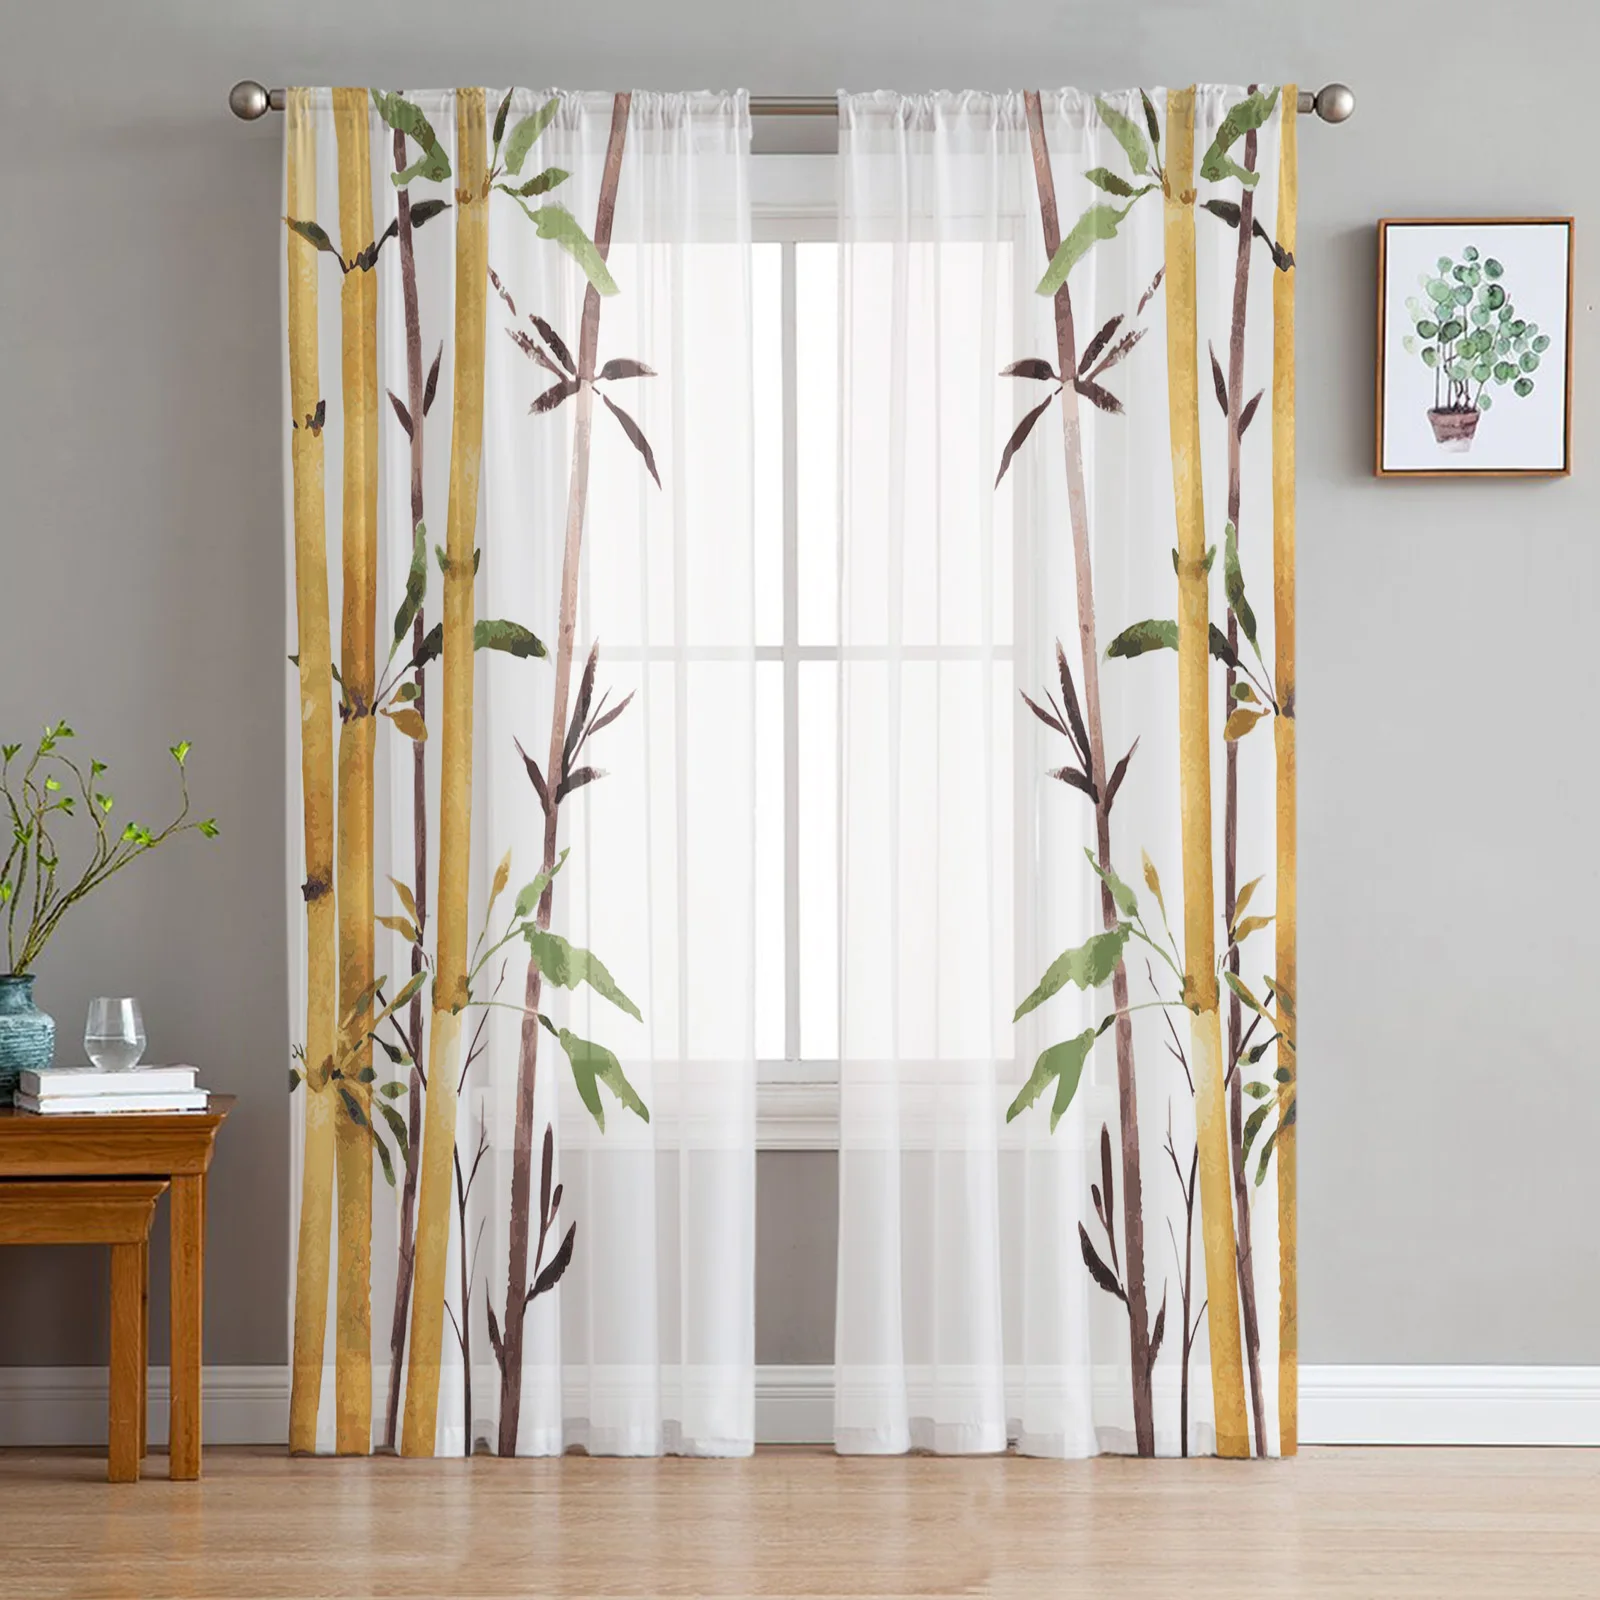 Bamboo Watercolor Painting Plant Art Sheer Curtains Modern Gauze Curtain for Living Room Bedroom Voile Yarn Curtains